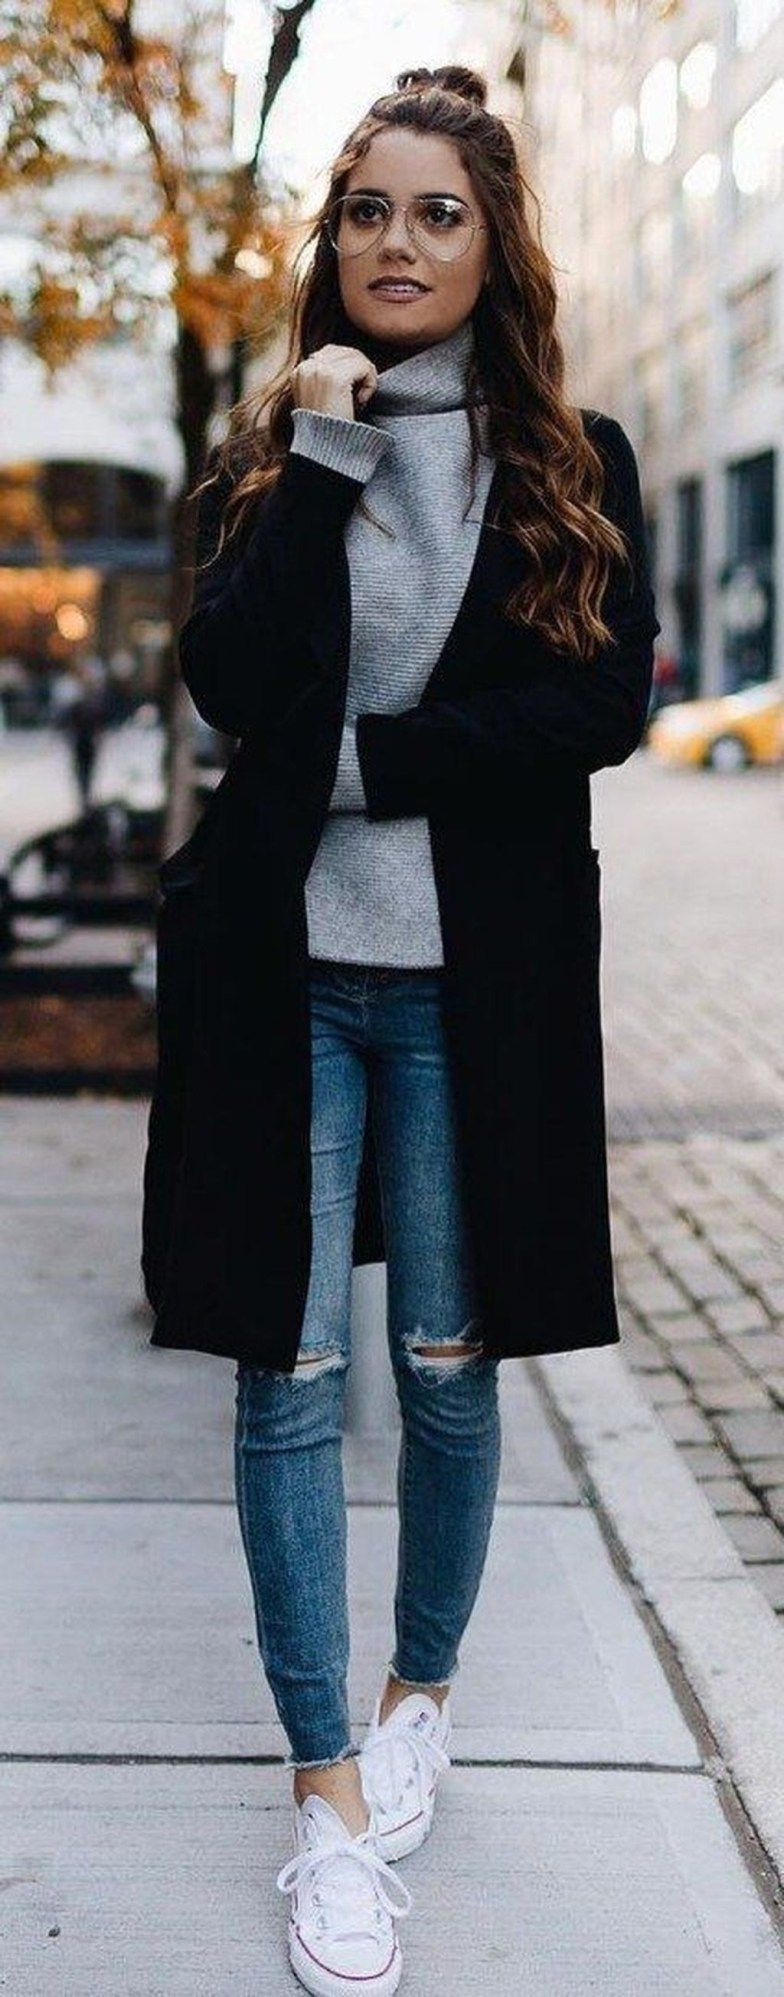 Winter Fashion Ideas
 Best casual winter outfit ideas 2018 for women 26